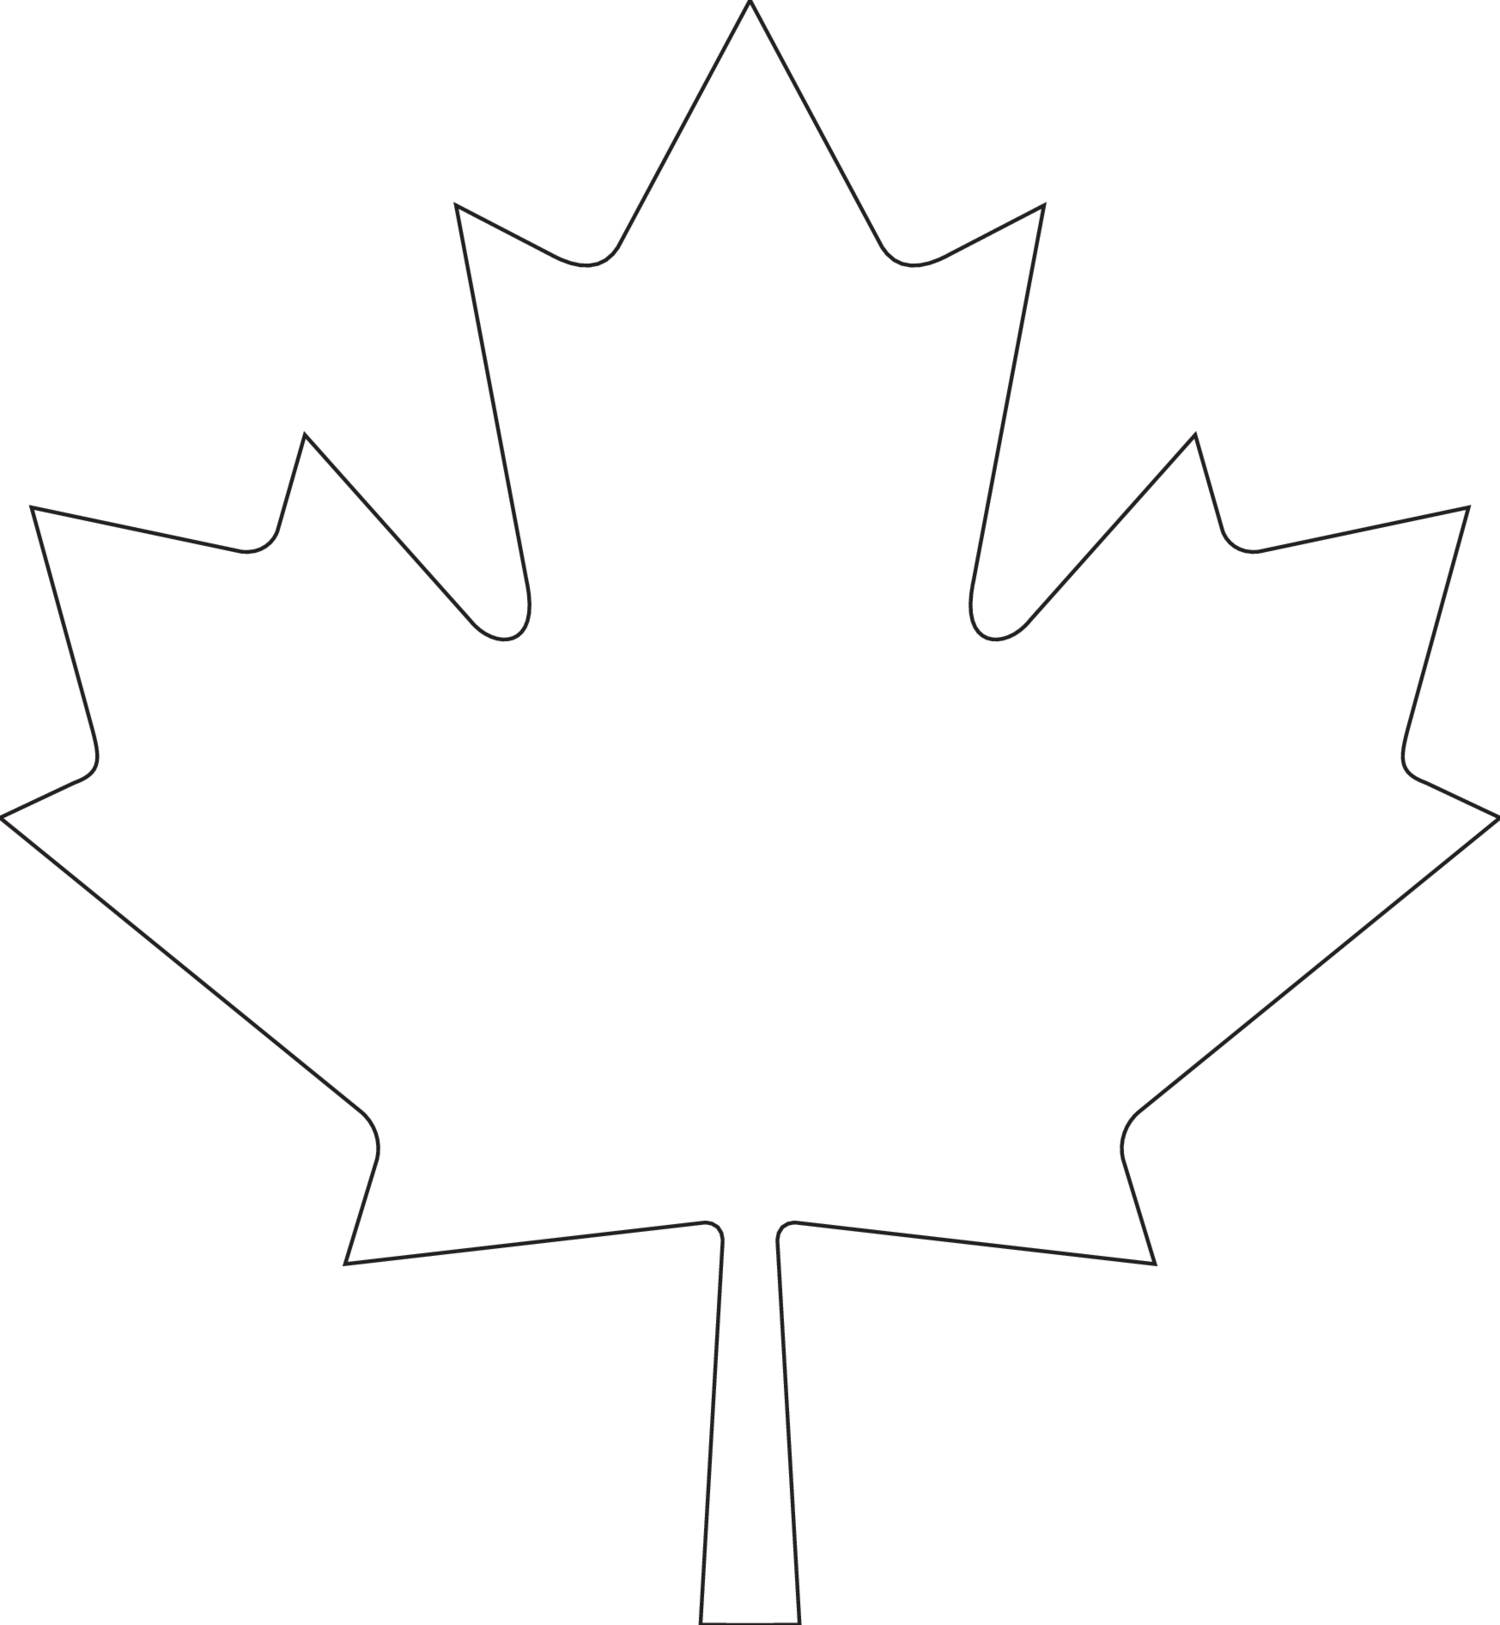 Canada Day maple leaf template.pdf DocDroid